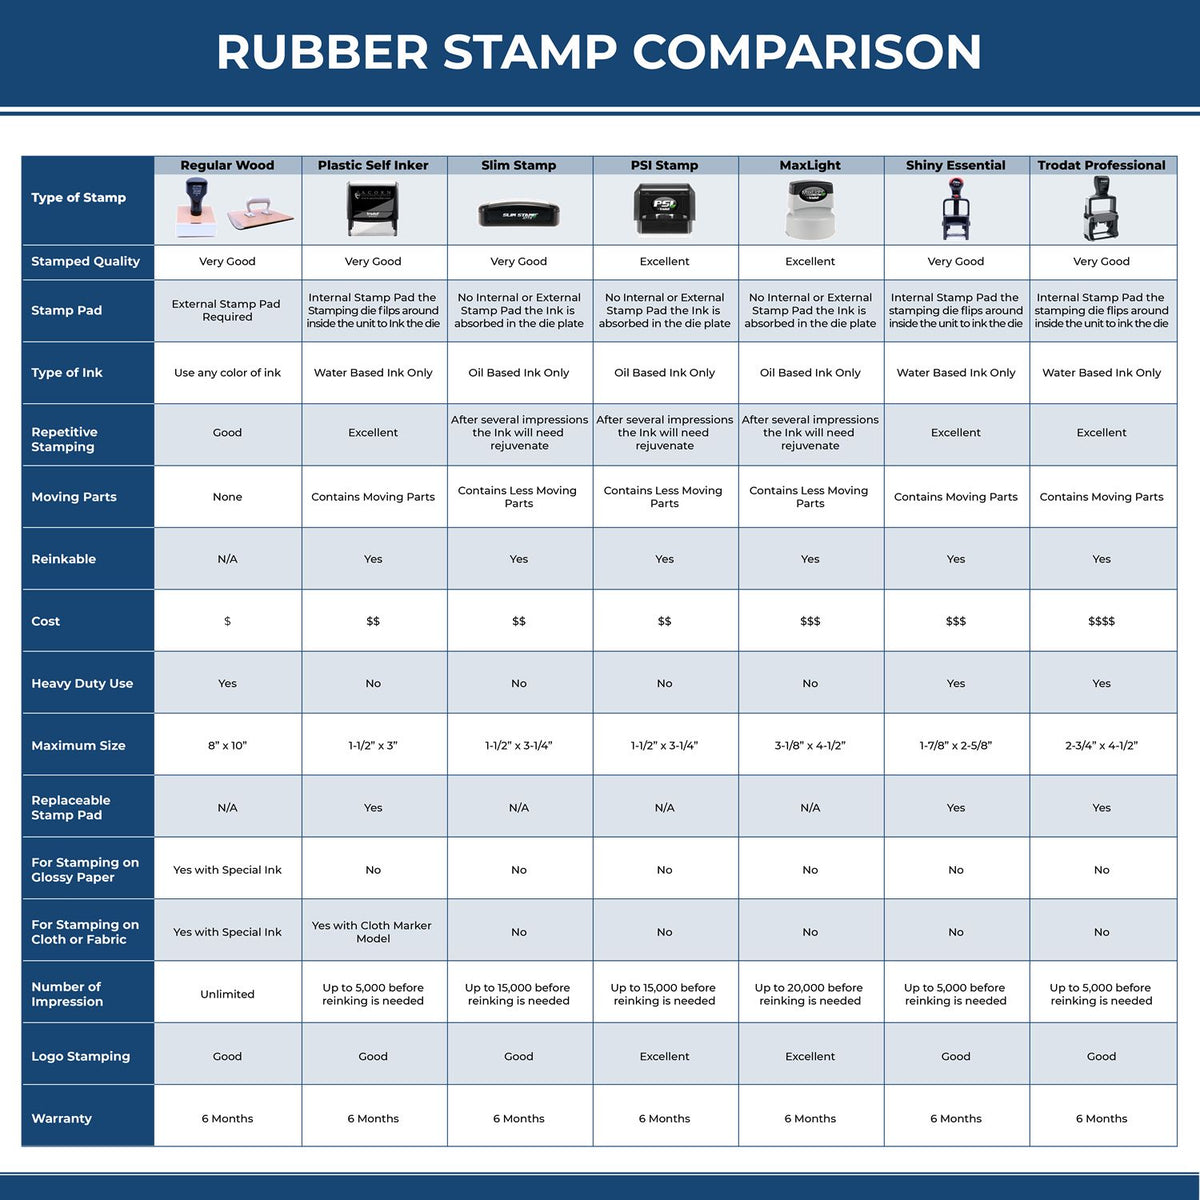 Large Received in Damaged Condition Rubber Stamp 4915R Rubber Stamp Comparison